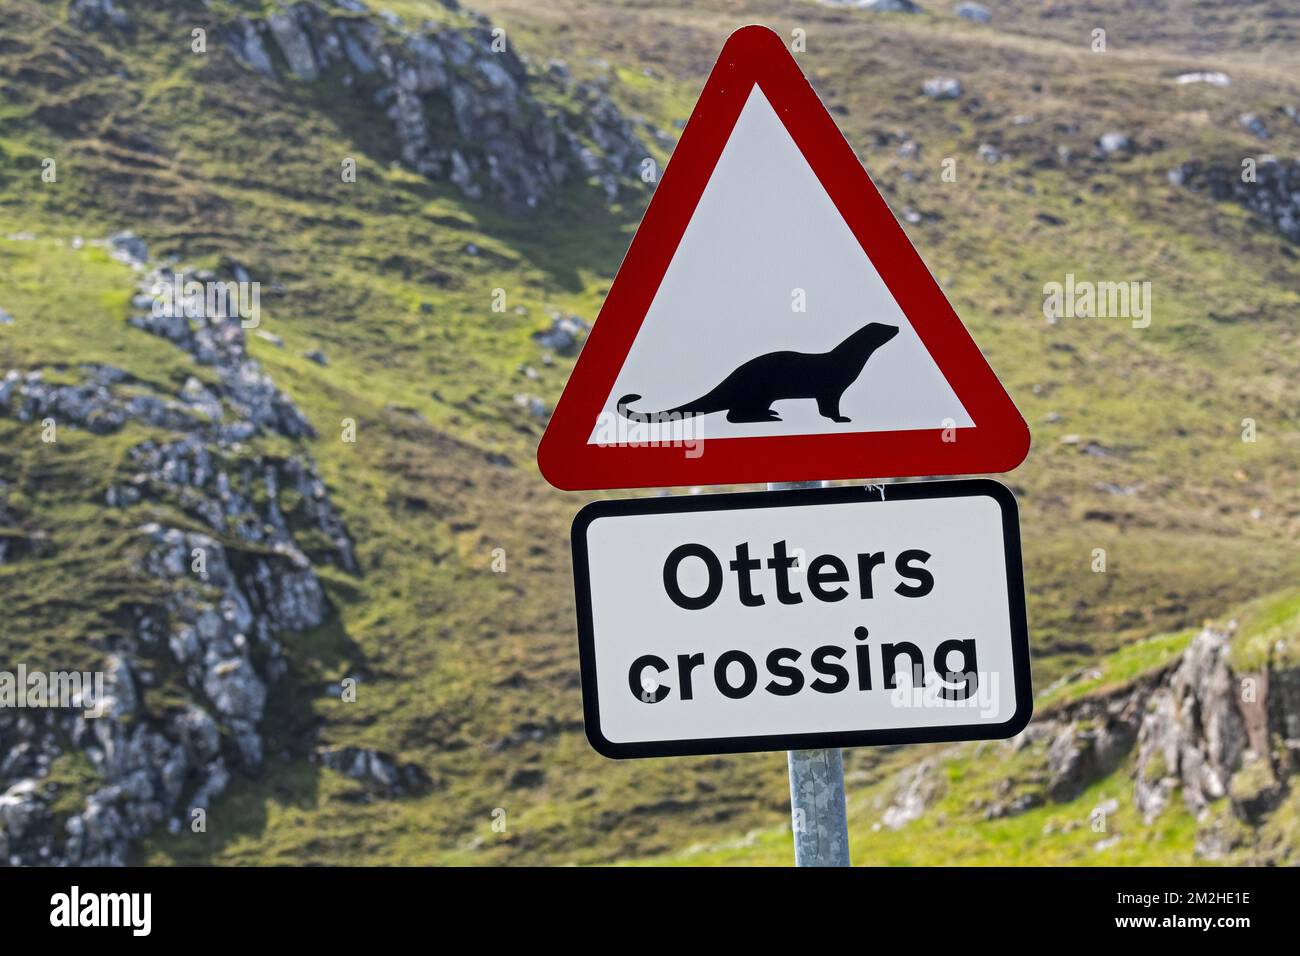 Eurasian otter / European otter (Lutra lutra) road warning sign for otters crossing street in coastal Scotland, UK | Panneau de signalisation pour loutre d'Europe / loutre européenne (Lutra lutra) 09/06/2018 Stock Photo